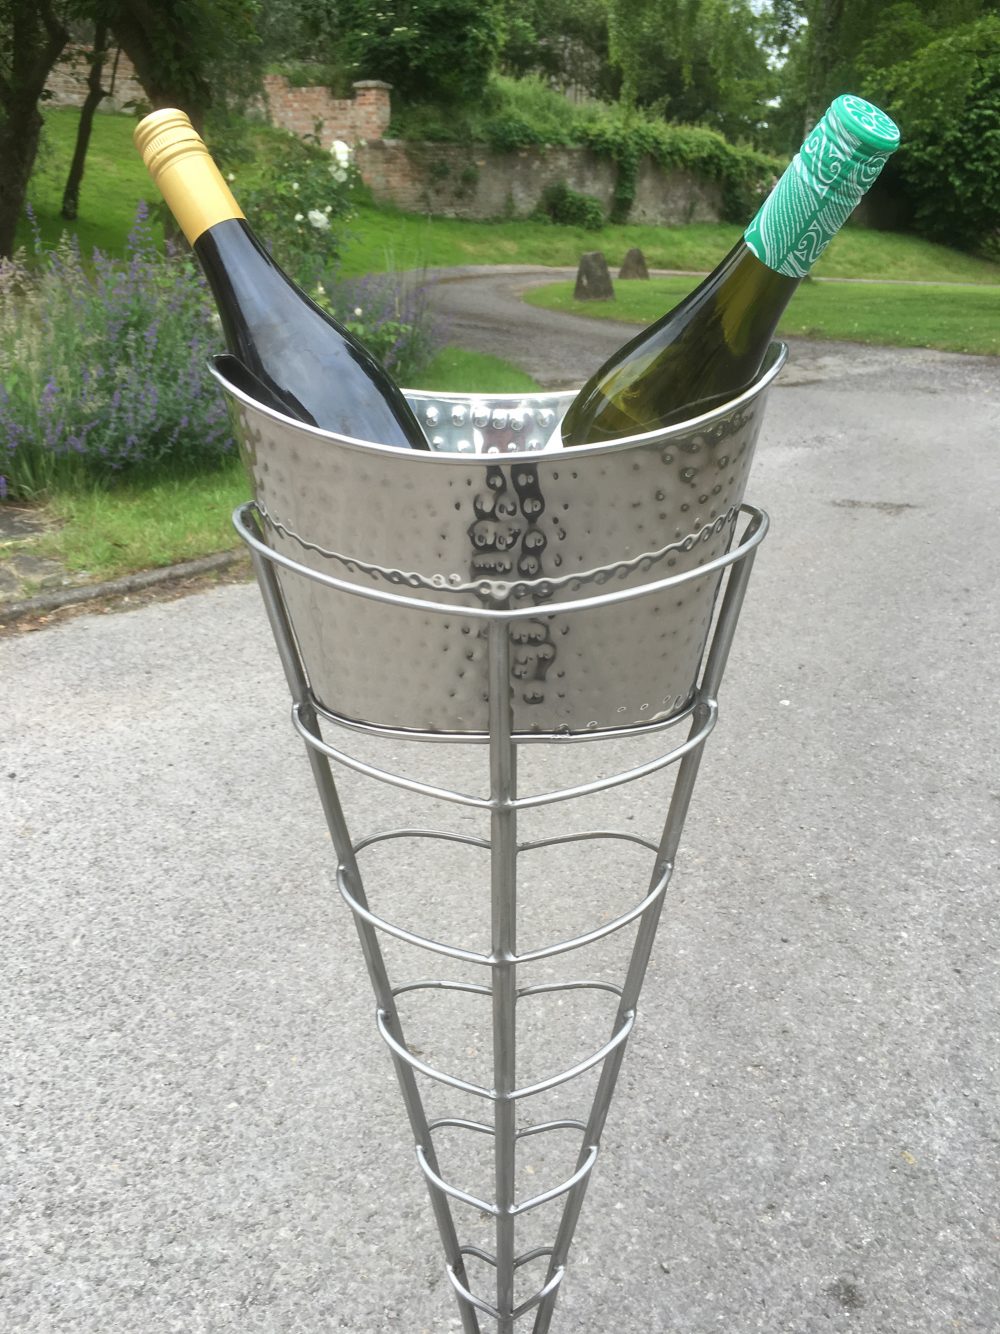 Stainless steel metal champagne bucket and stand - 2016